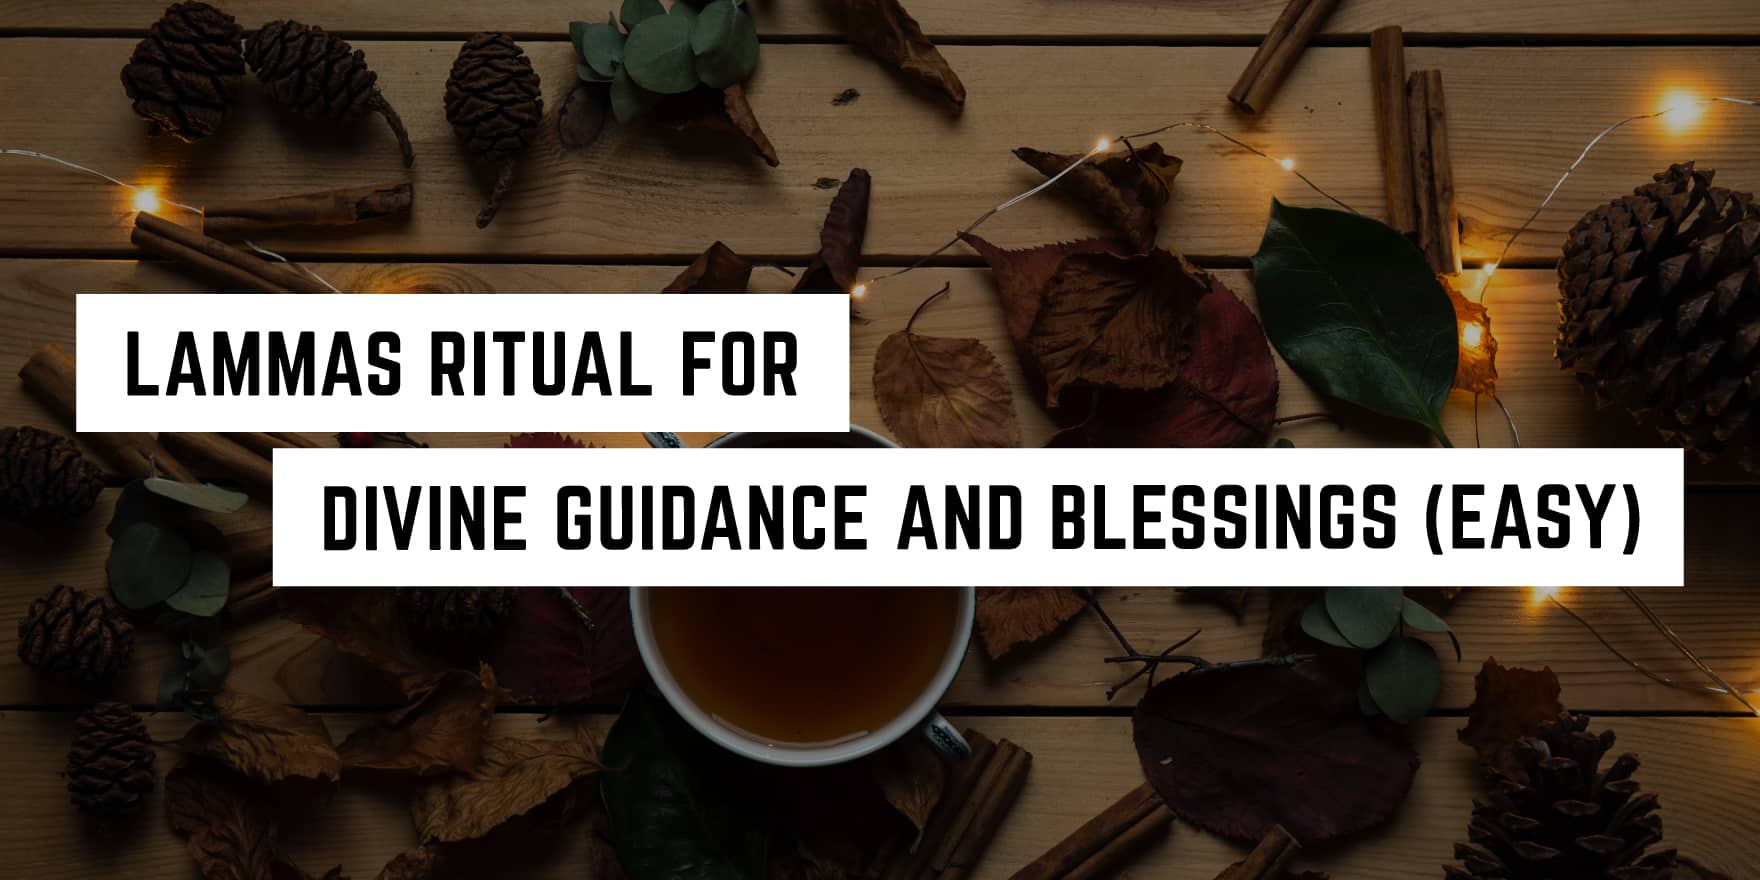 Easy Lammas Ritual for Divine Guidance and Blessings